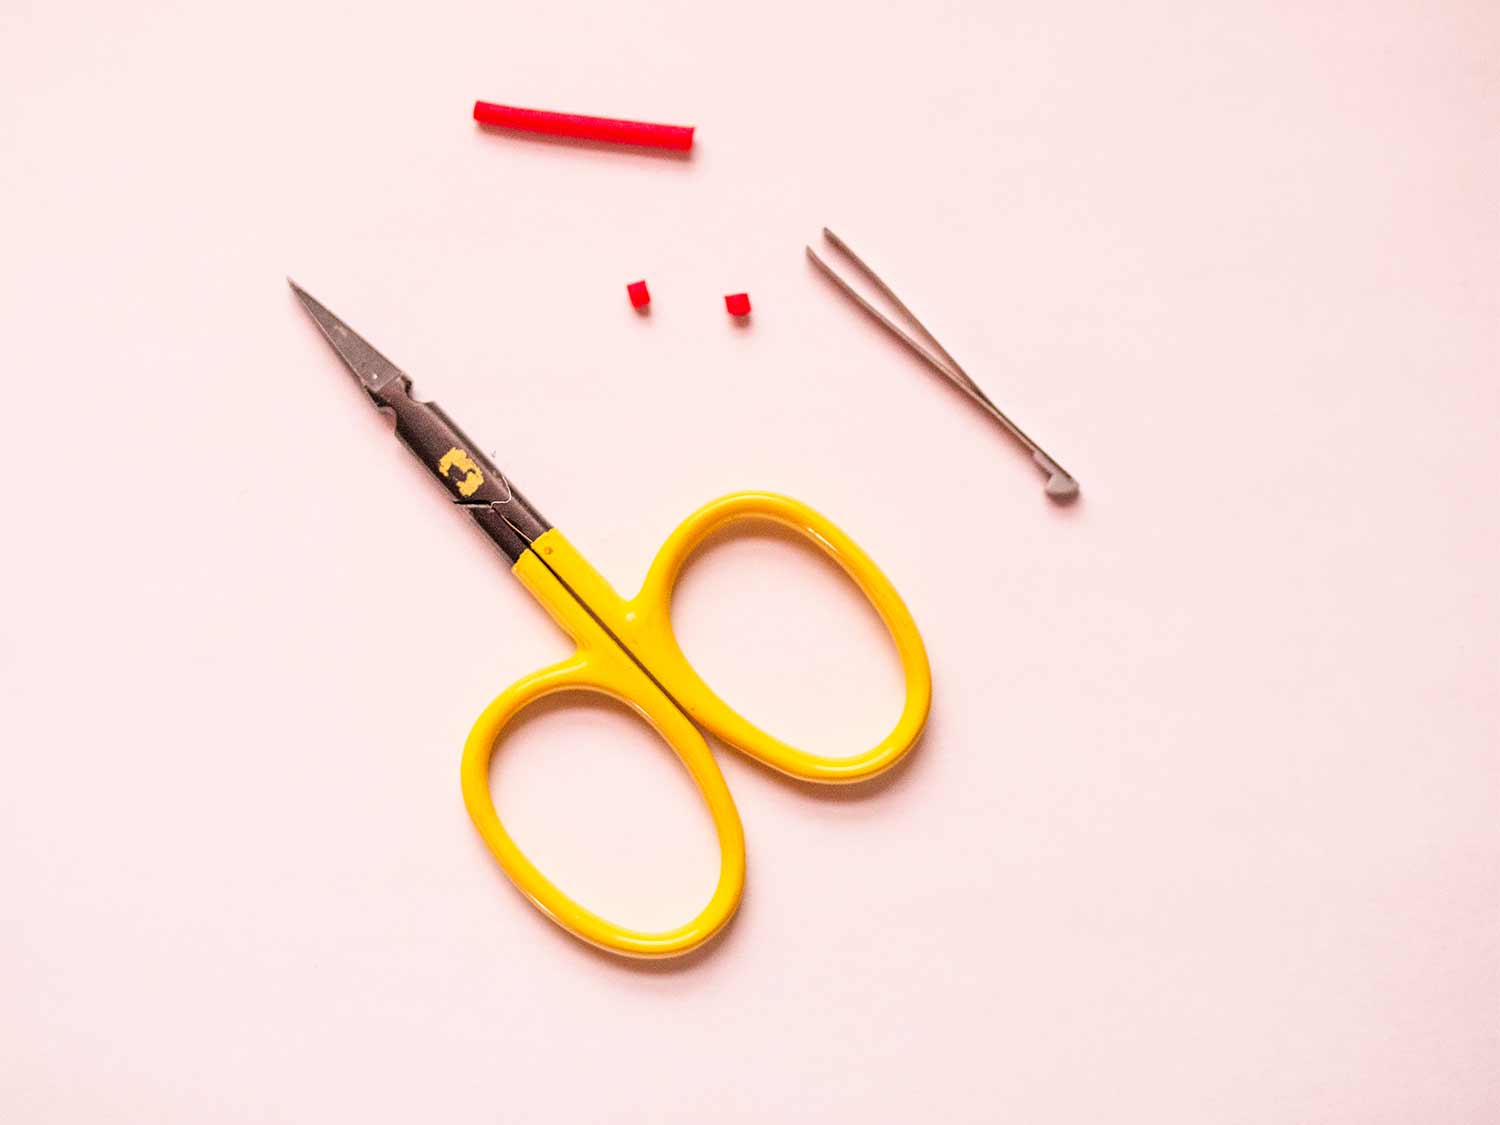 A pair of scissors and tweezers on a light background.